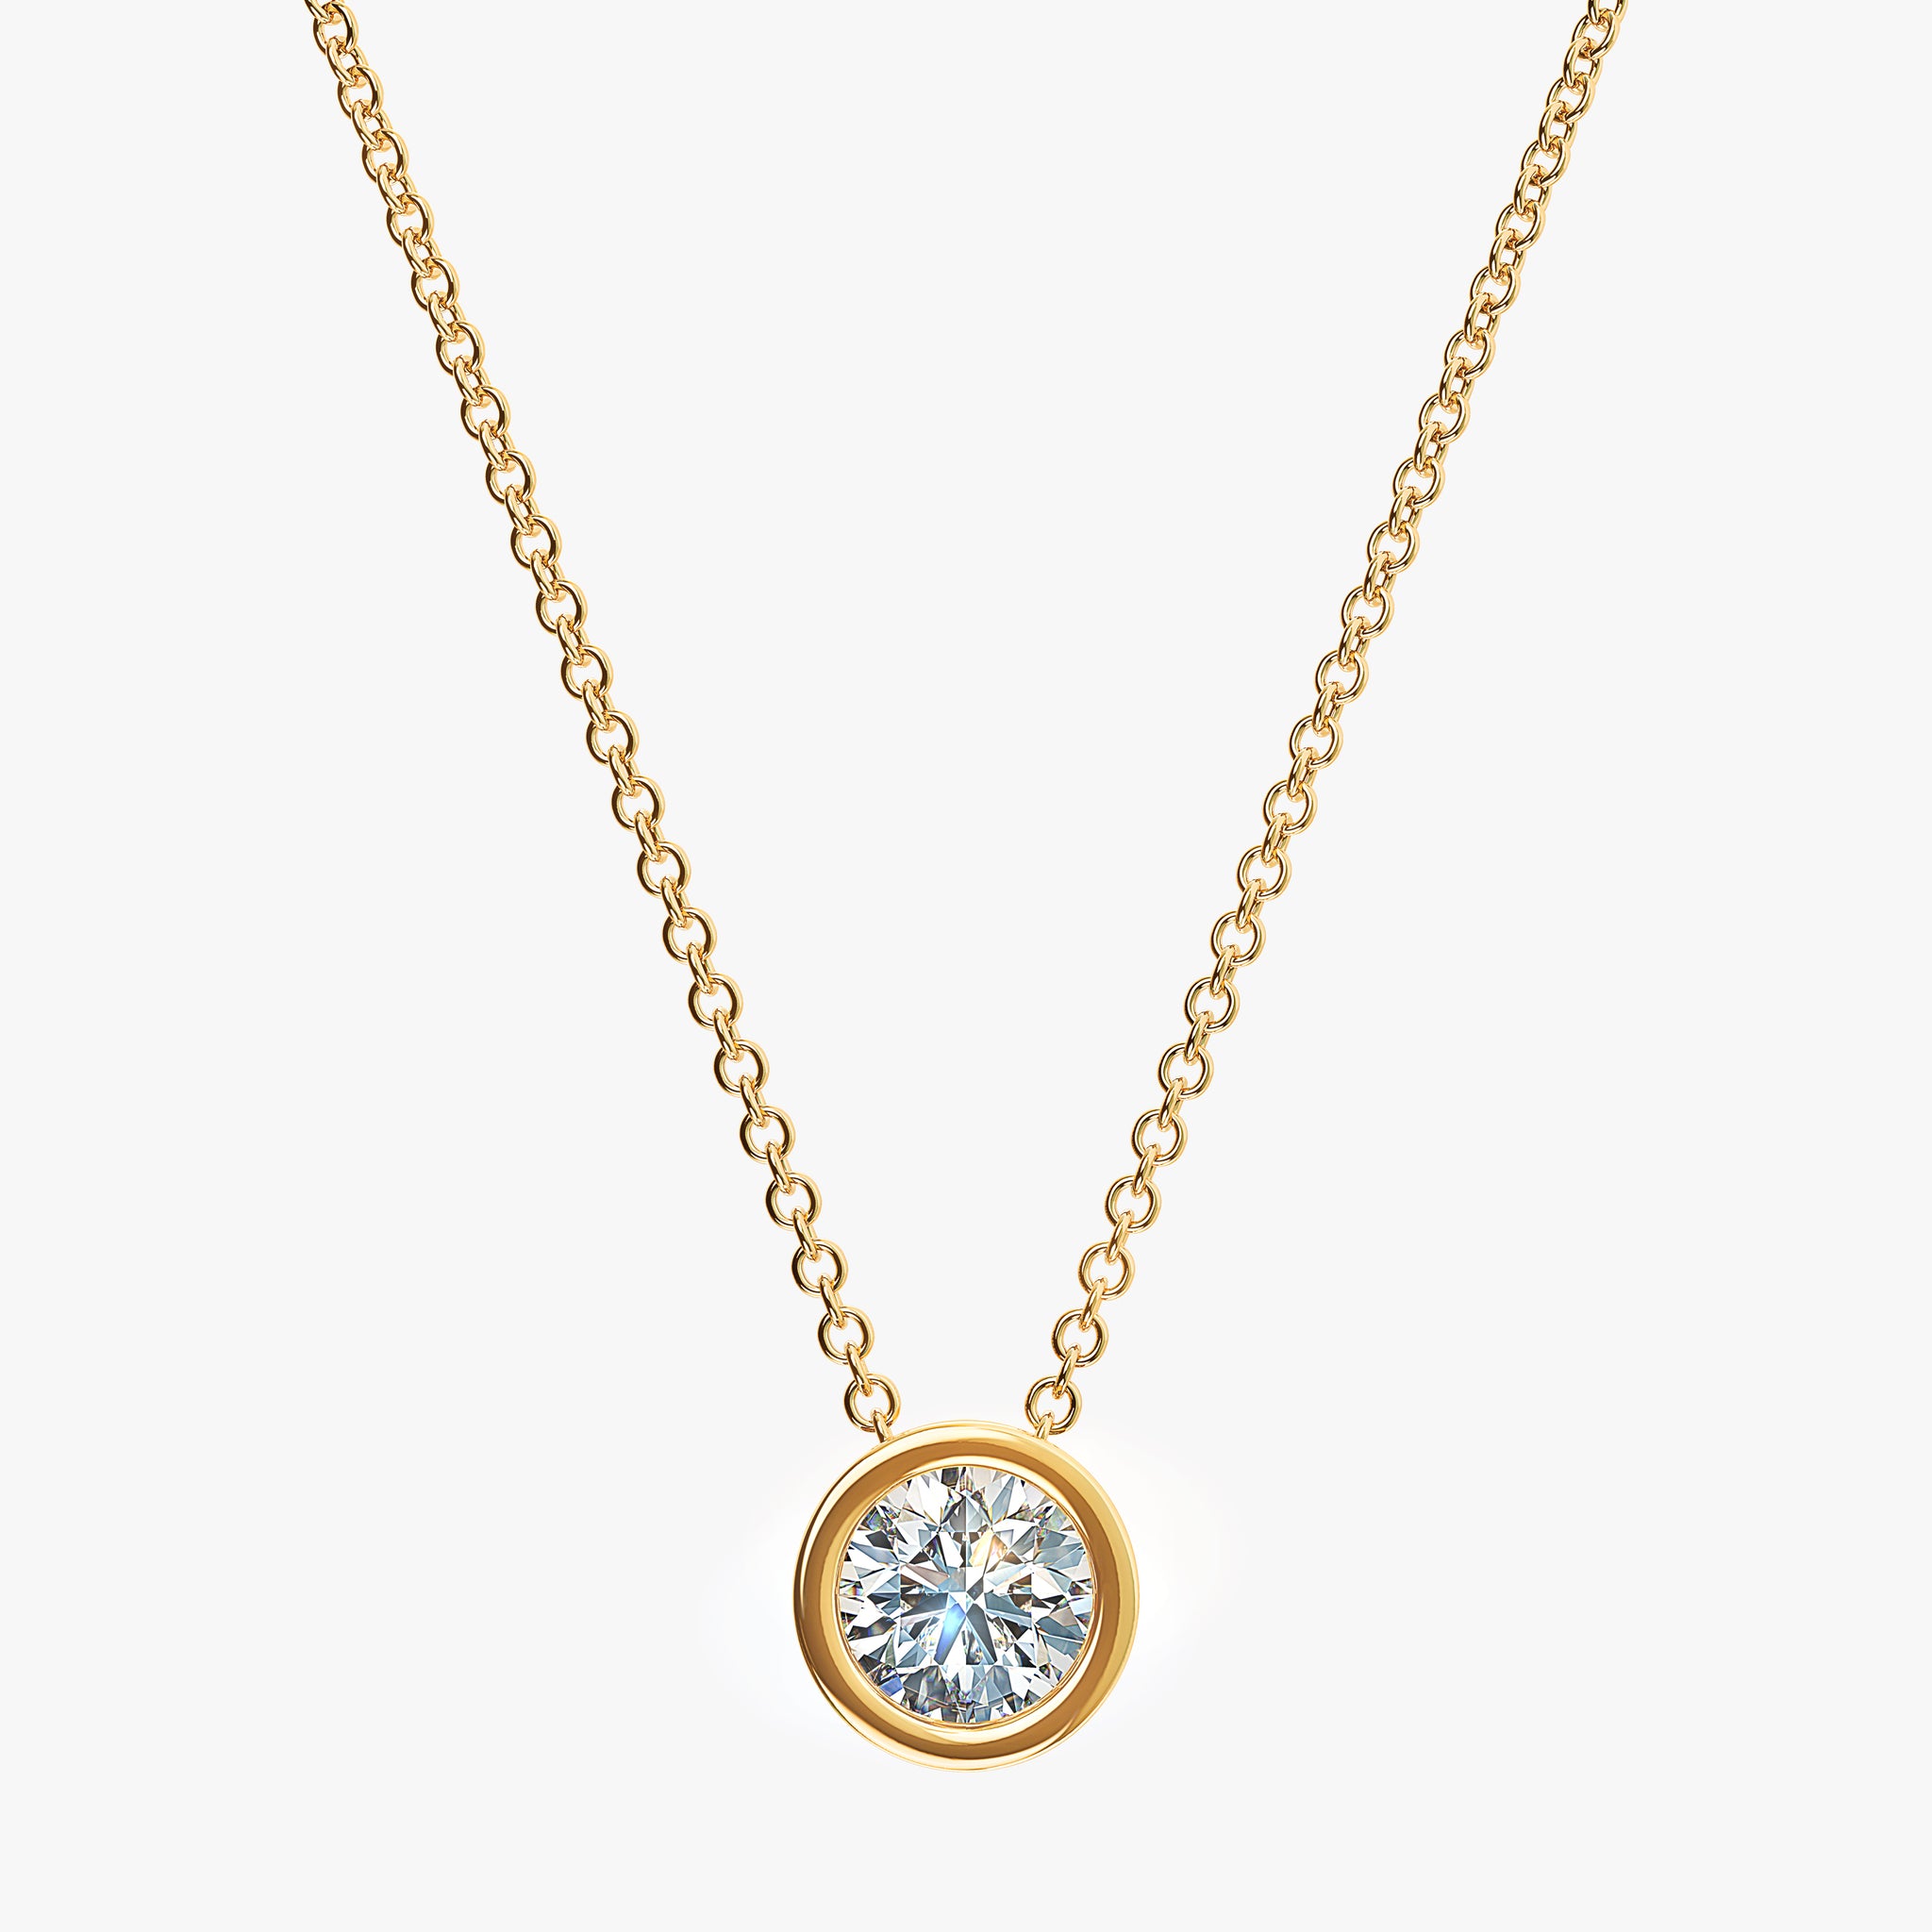 J'EVAR 14kt Yellow Gold Solitaire Diamond Necklace ALTR Lab Grown Bezel Solitaire Diamond Necklace Front View